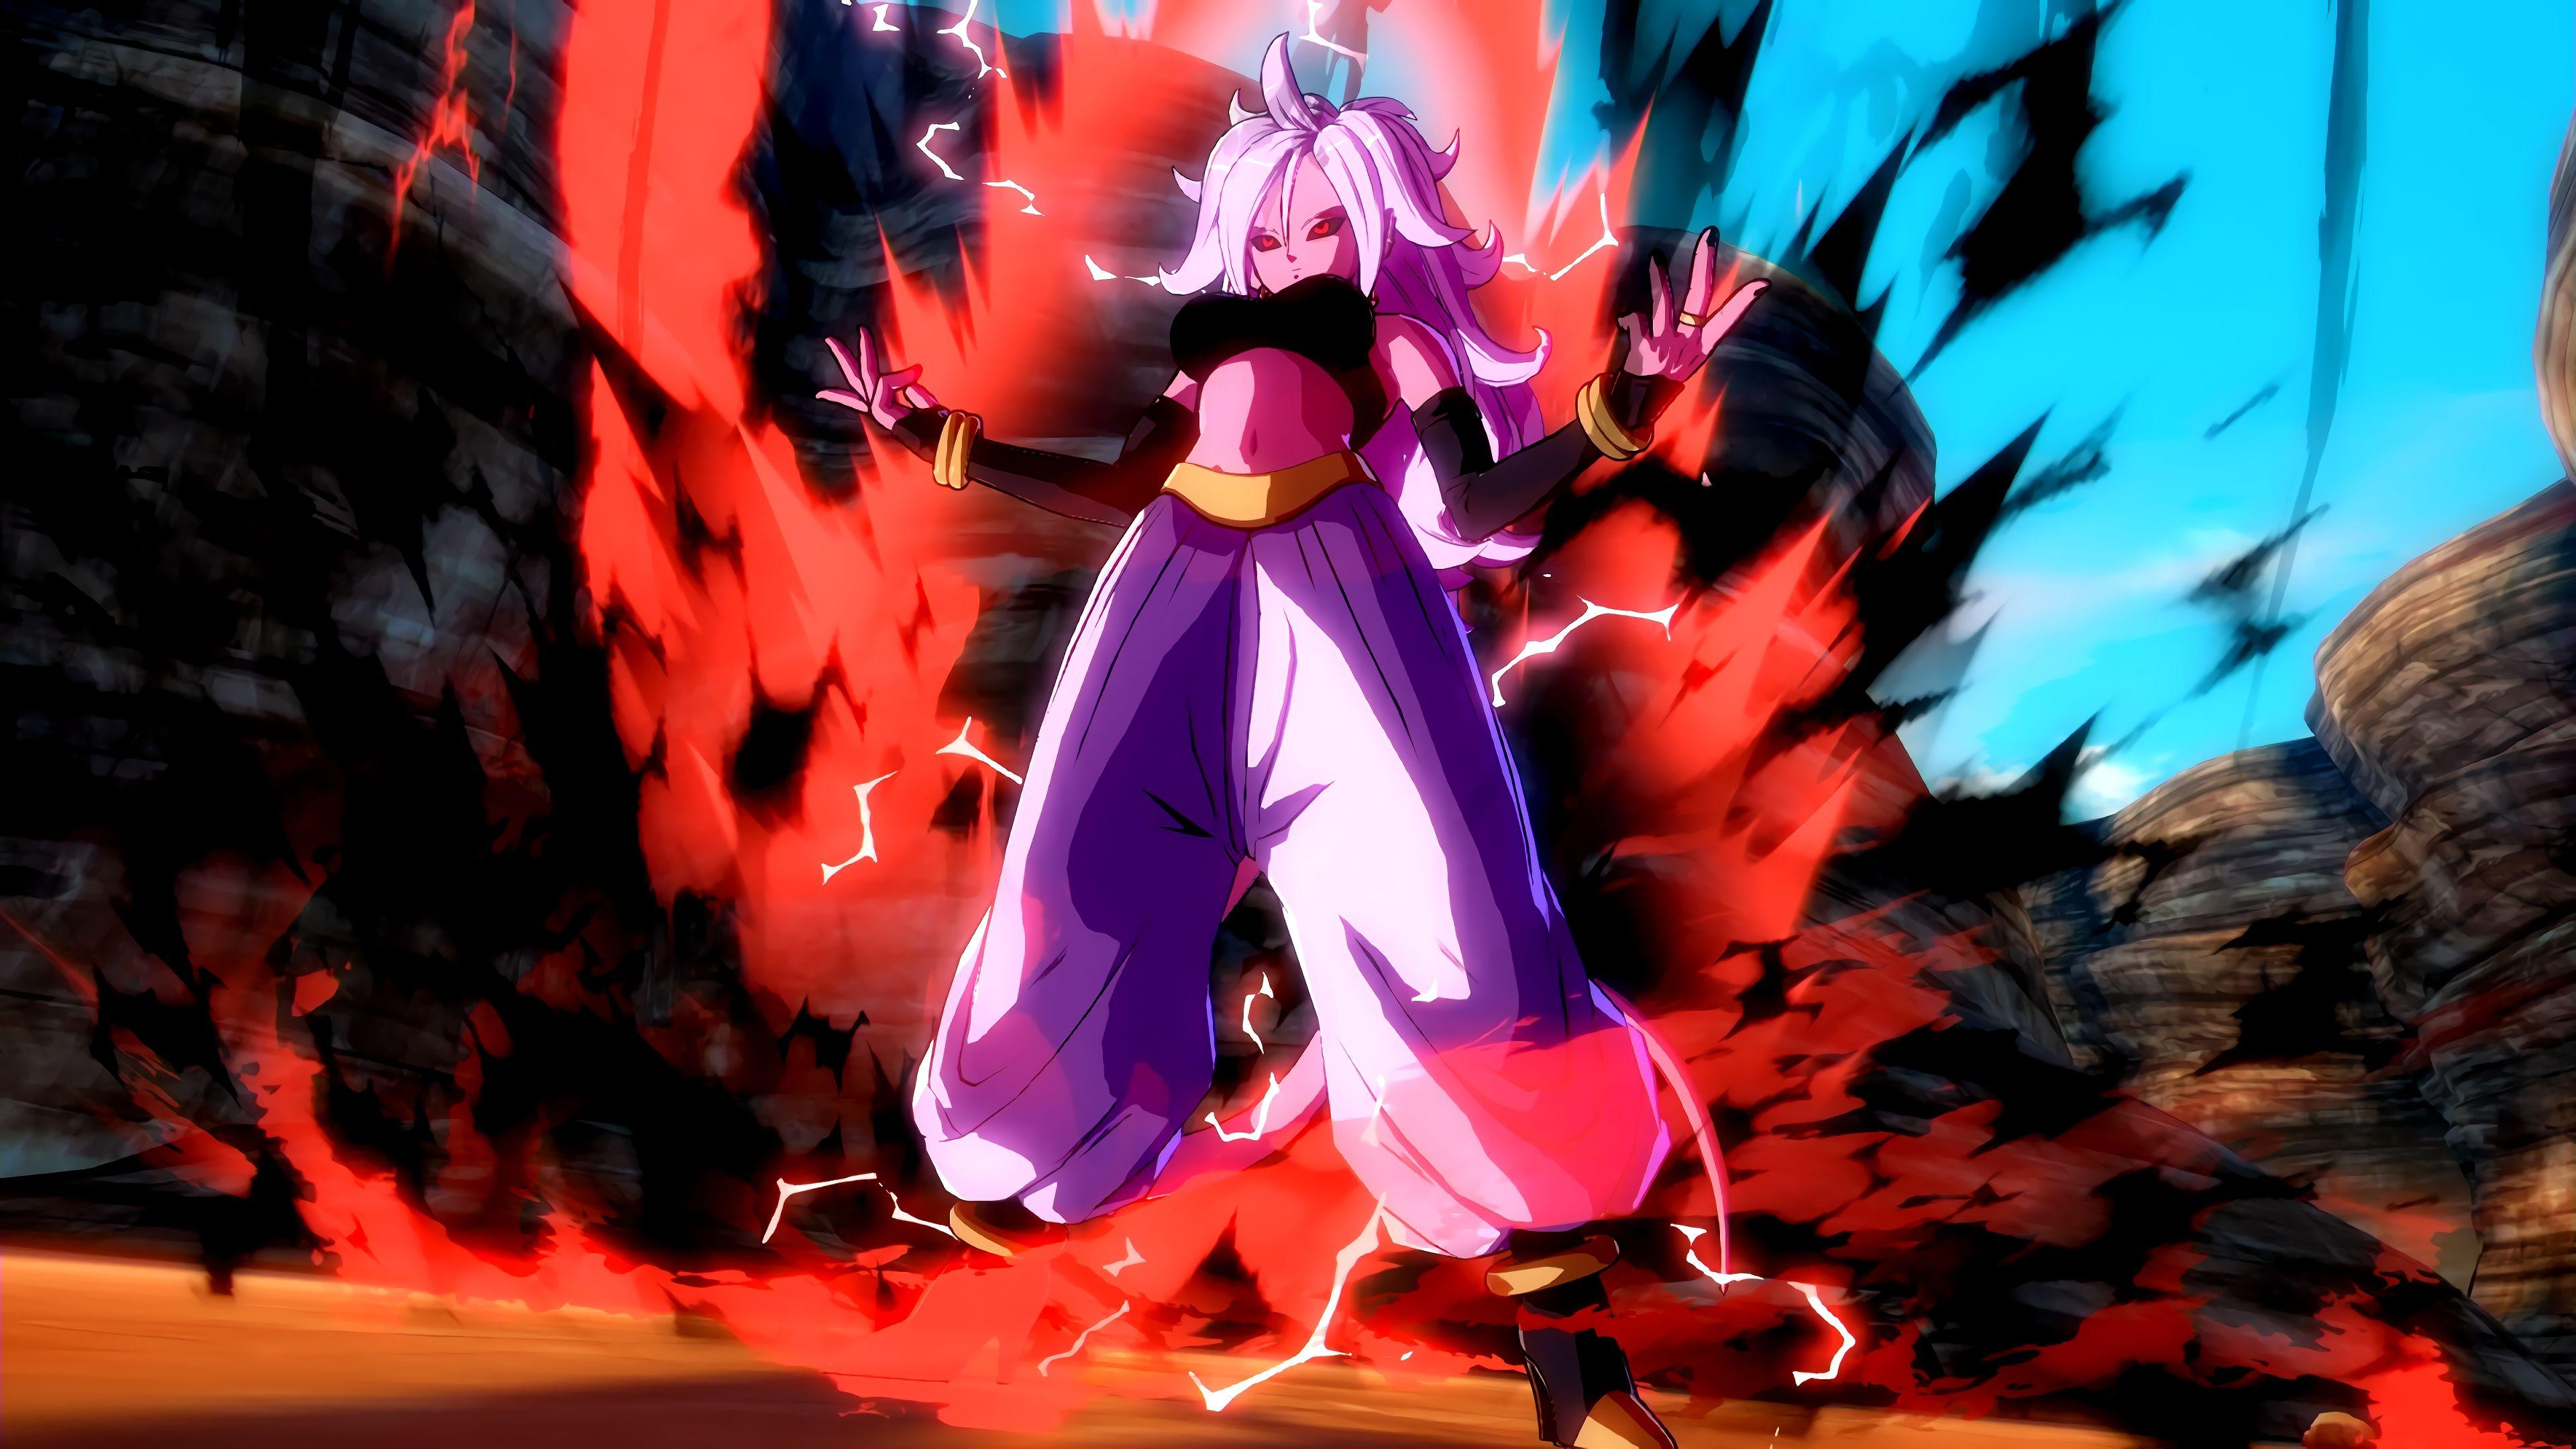 Android 21 from Dragon Ball FighterZ Dragon Ball Legends Arts for Desktop  4K wallpaper download